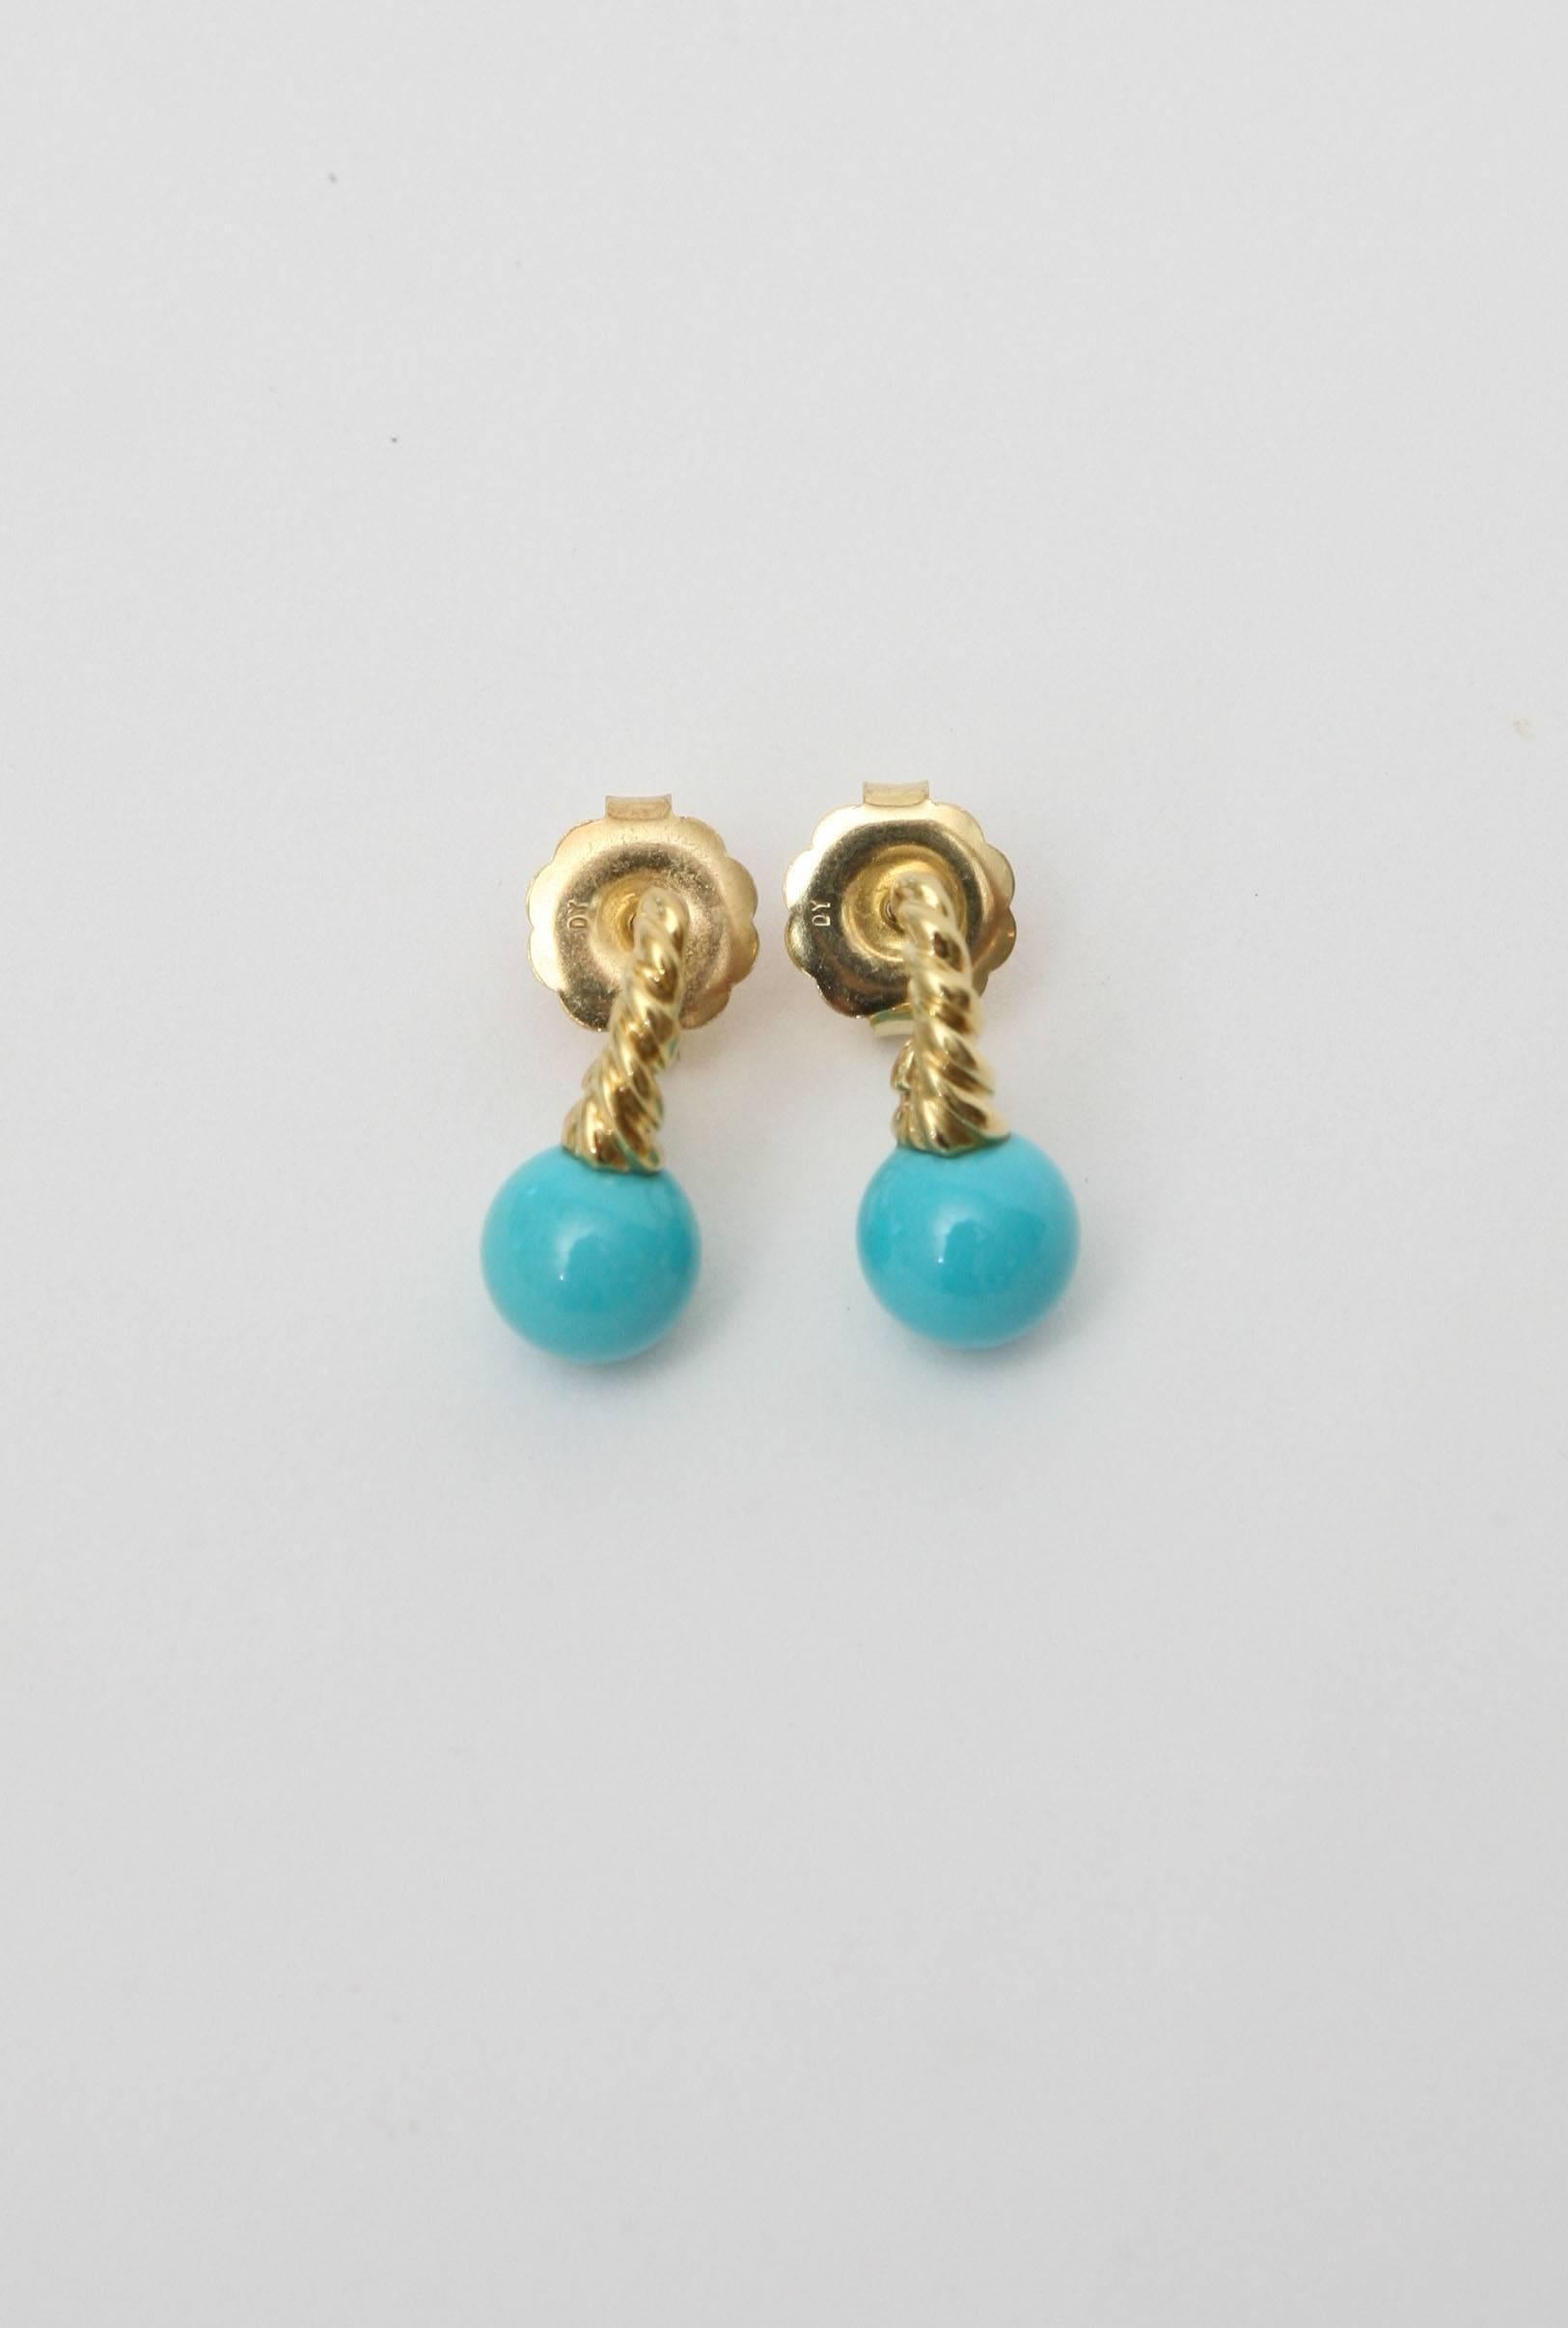 These small but beautiful pair of earrings have persian turquoise balls set against a rope and backing of 14 carat gold.
They are prefect for the young graduate and or a woman who likes small drop earrings on their ear lobe.

 